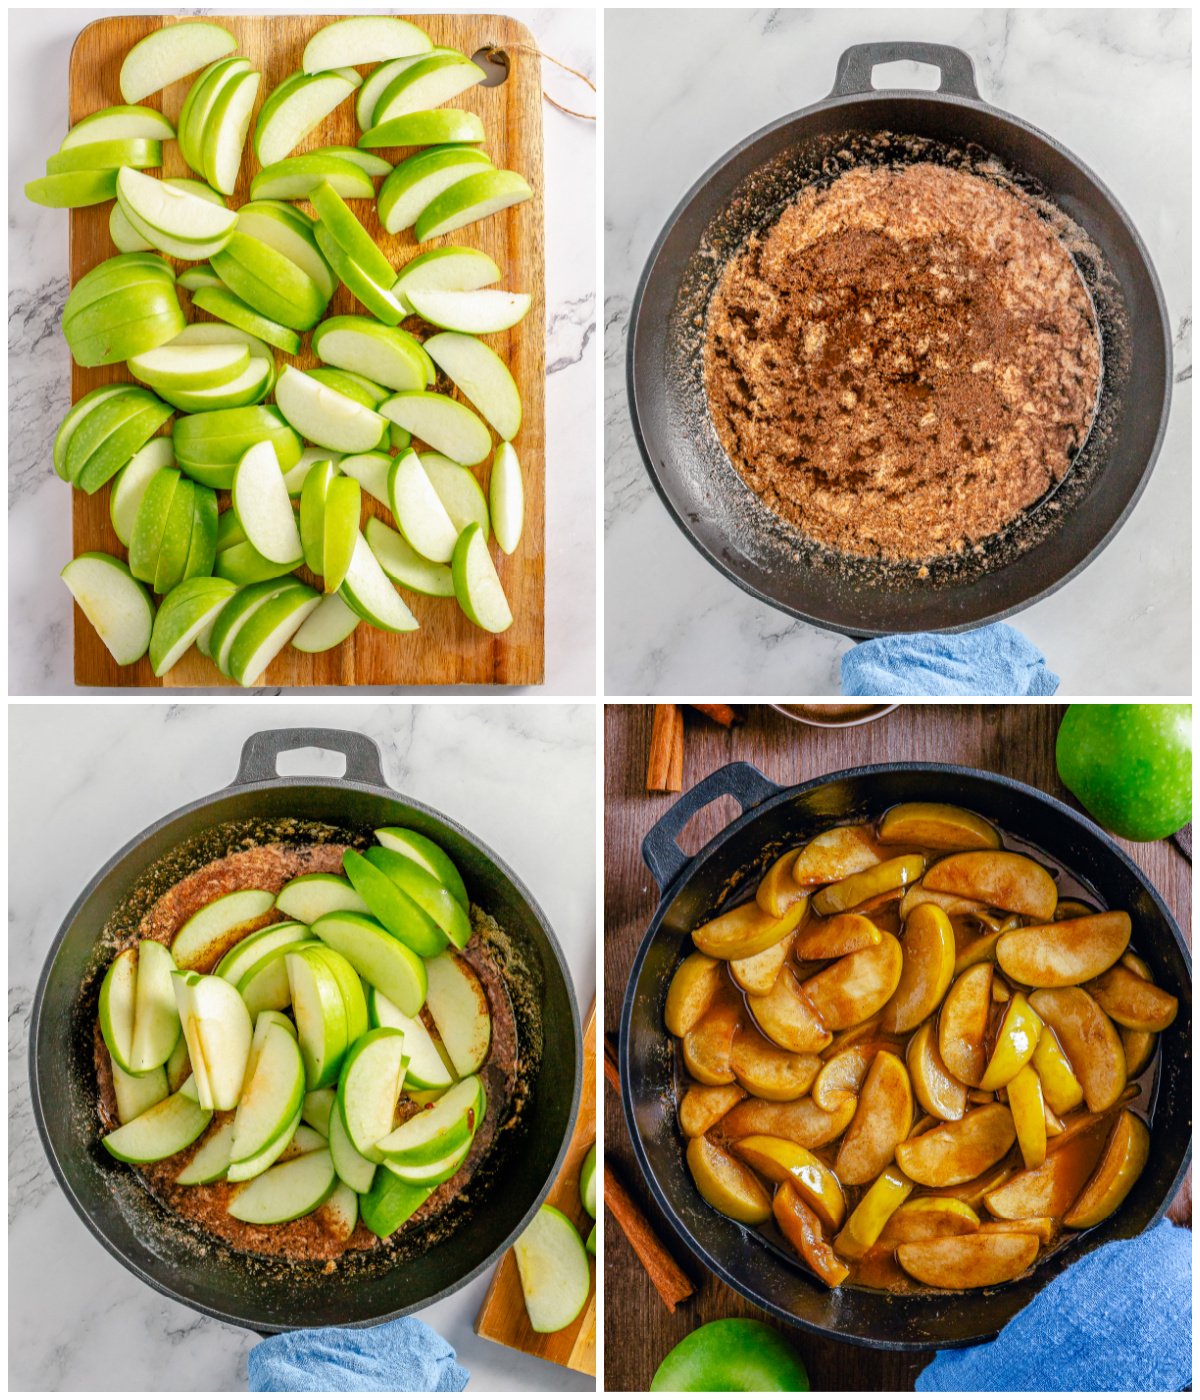 Step by step photos on how to make Fried Apples